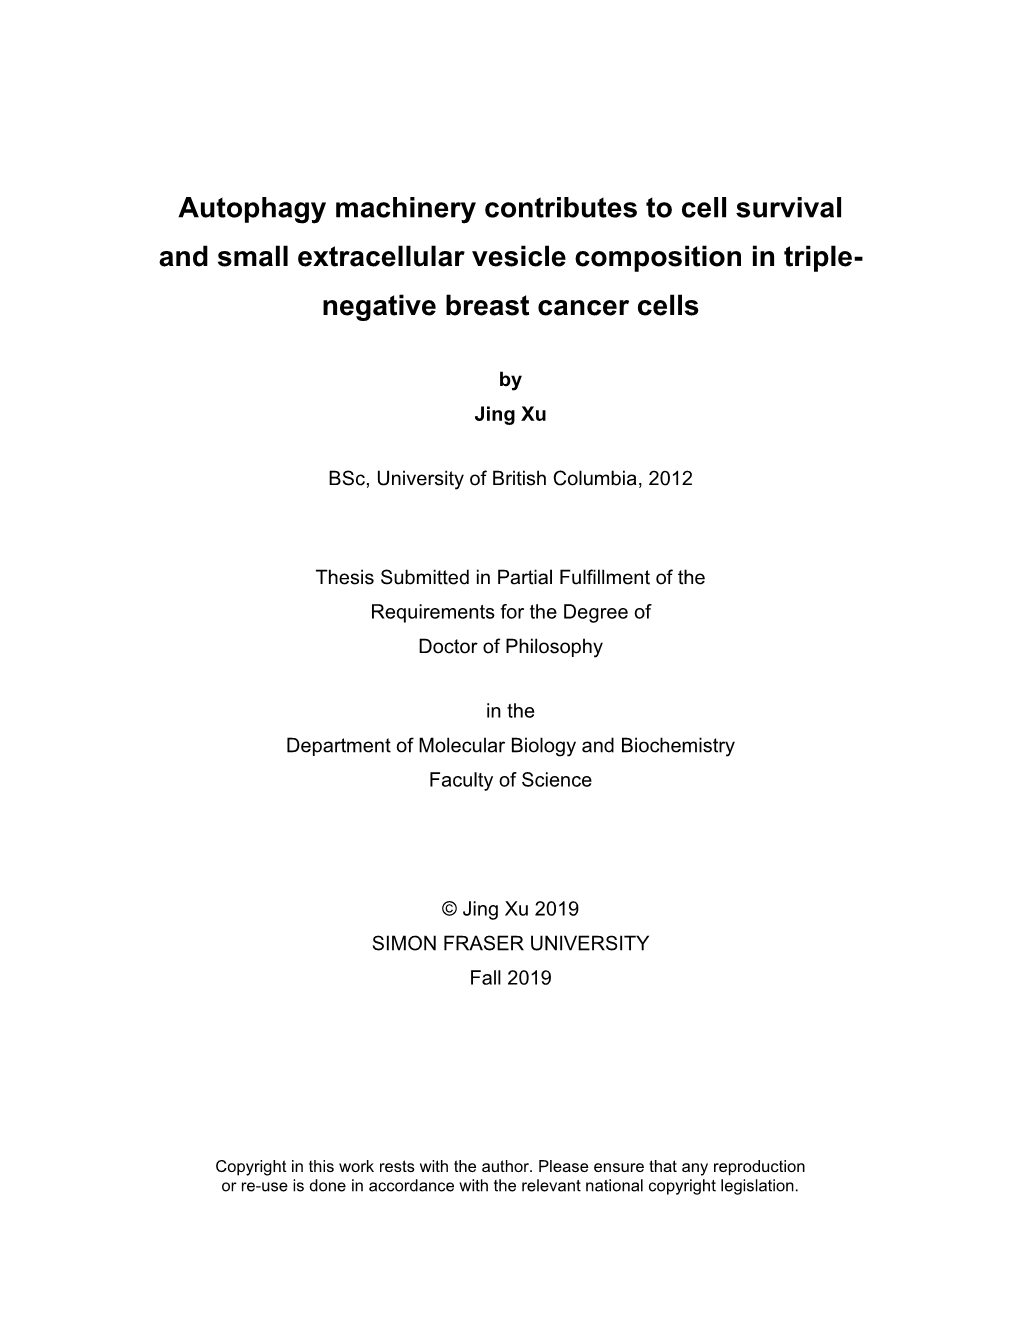 Autophagy Machinery Contributes to Cell Survival and Small Extracellular Vesicle Composition in Triple- Negative Breast Cancer Cells